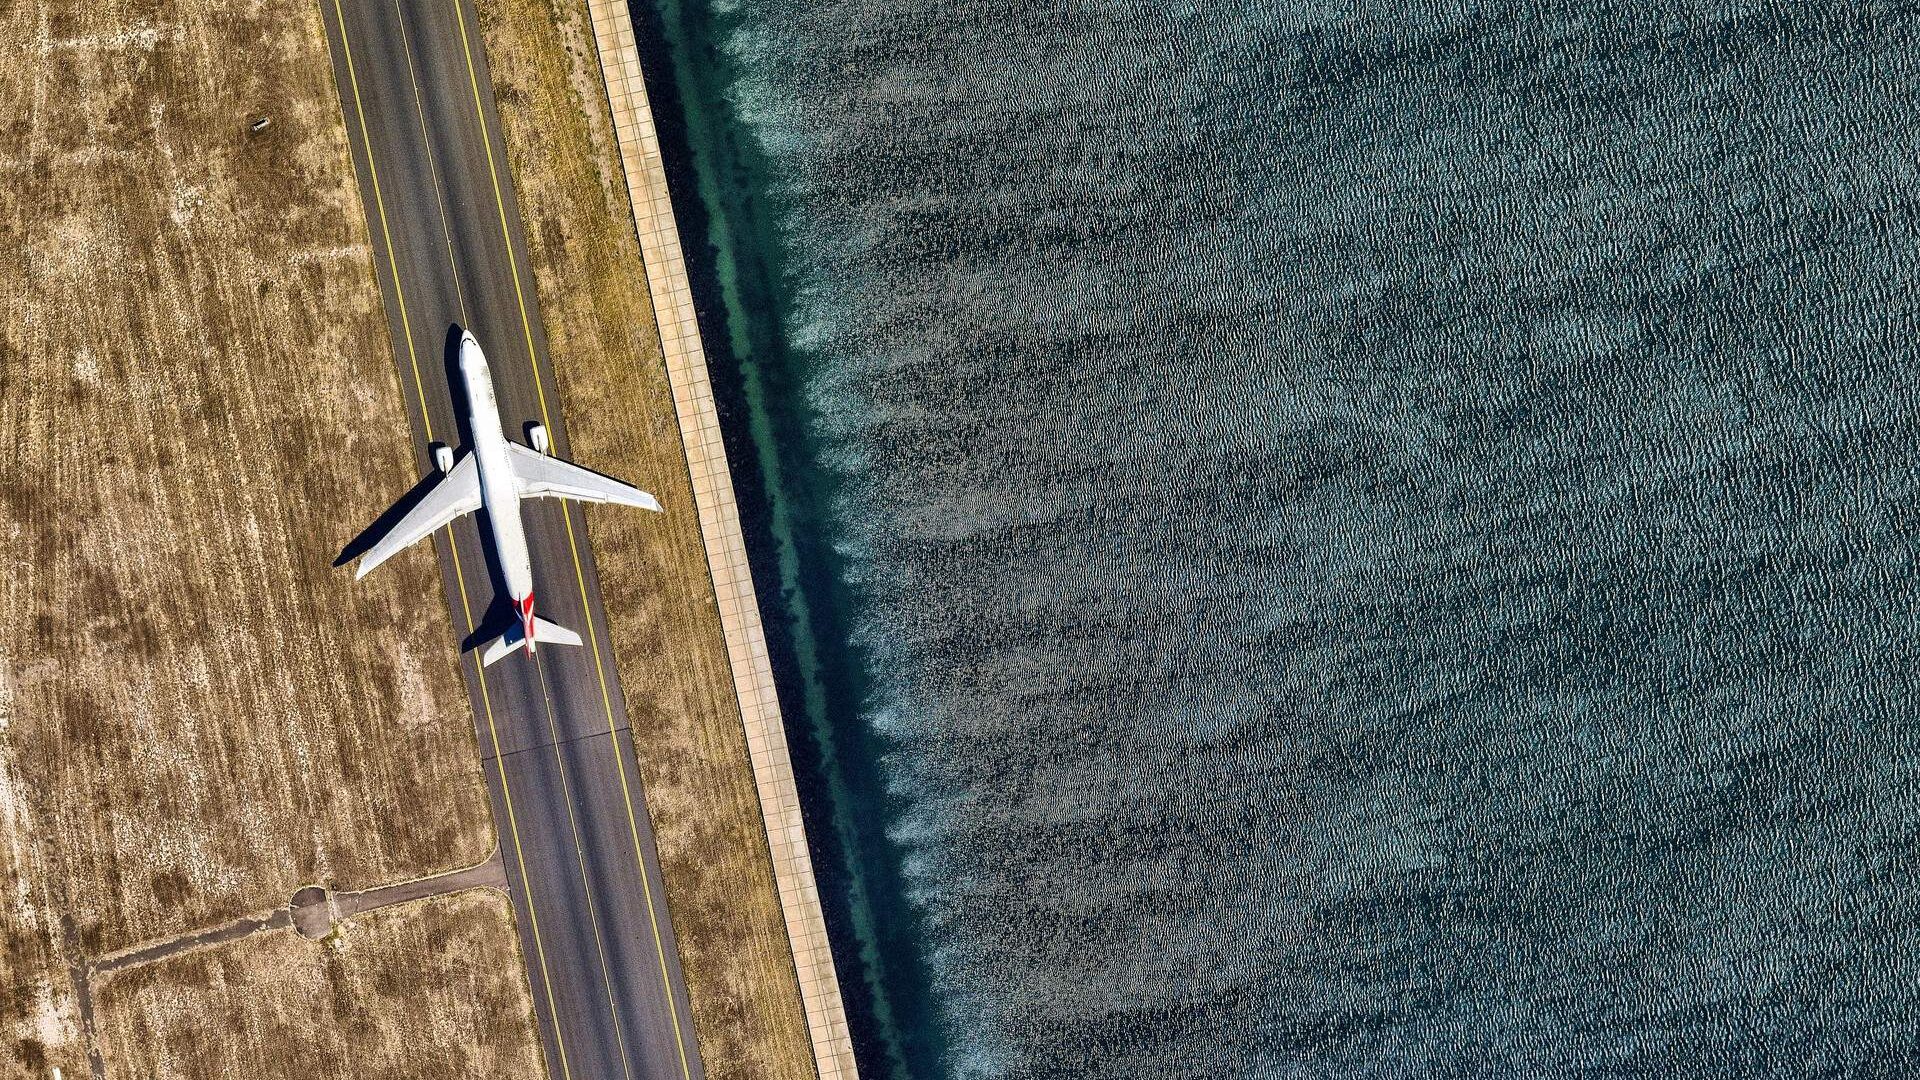 A white airplane on the runway alongside the ocean.